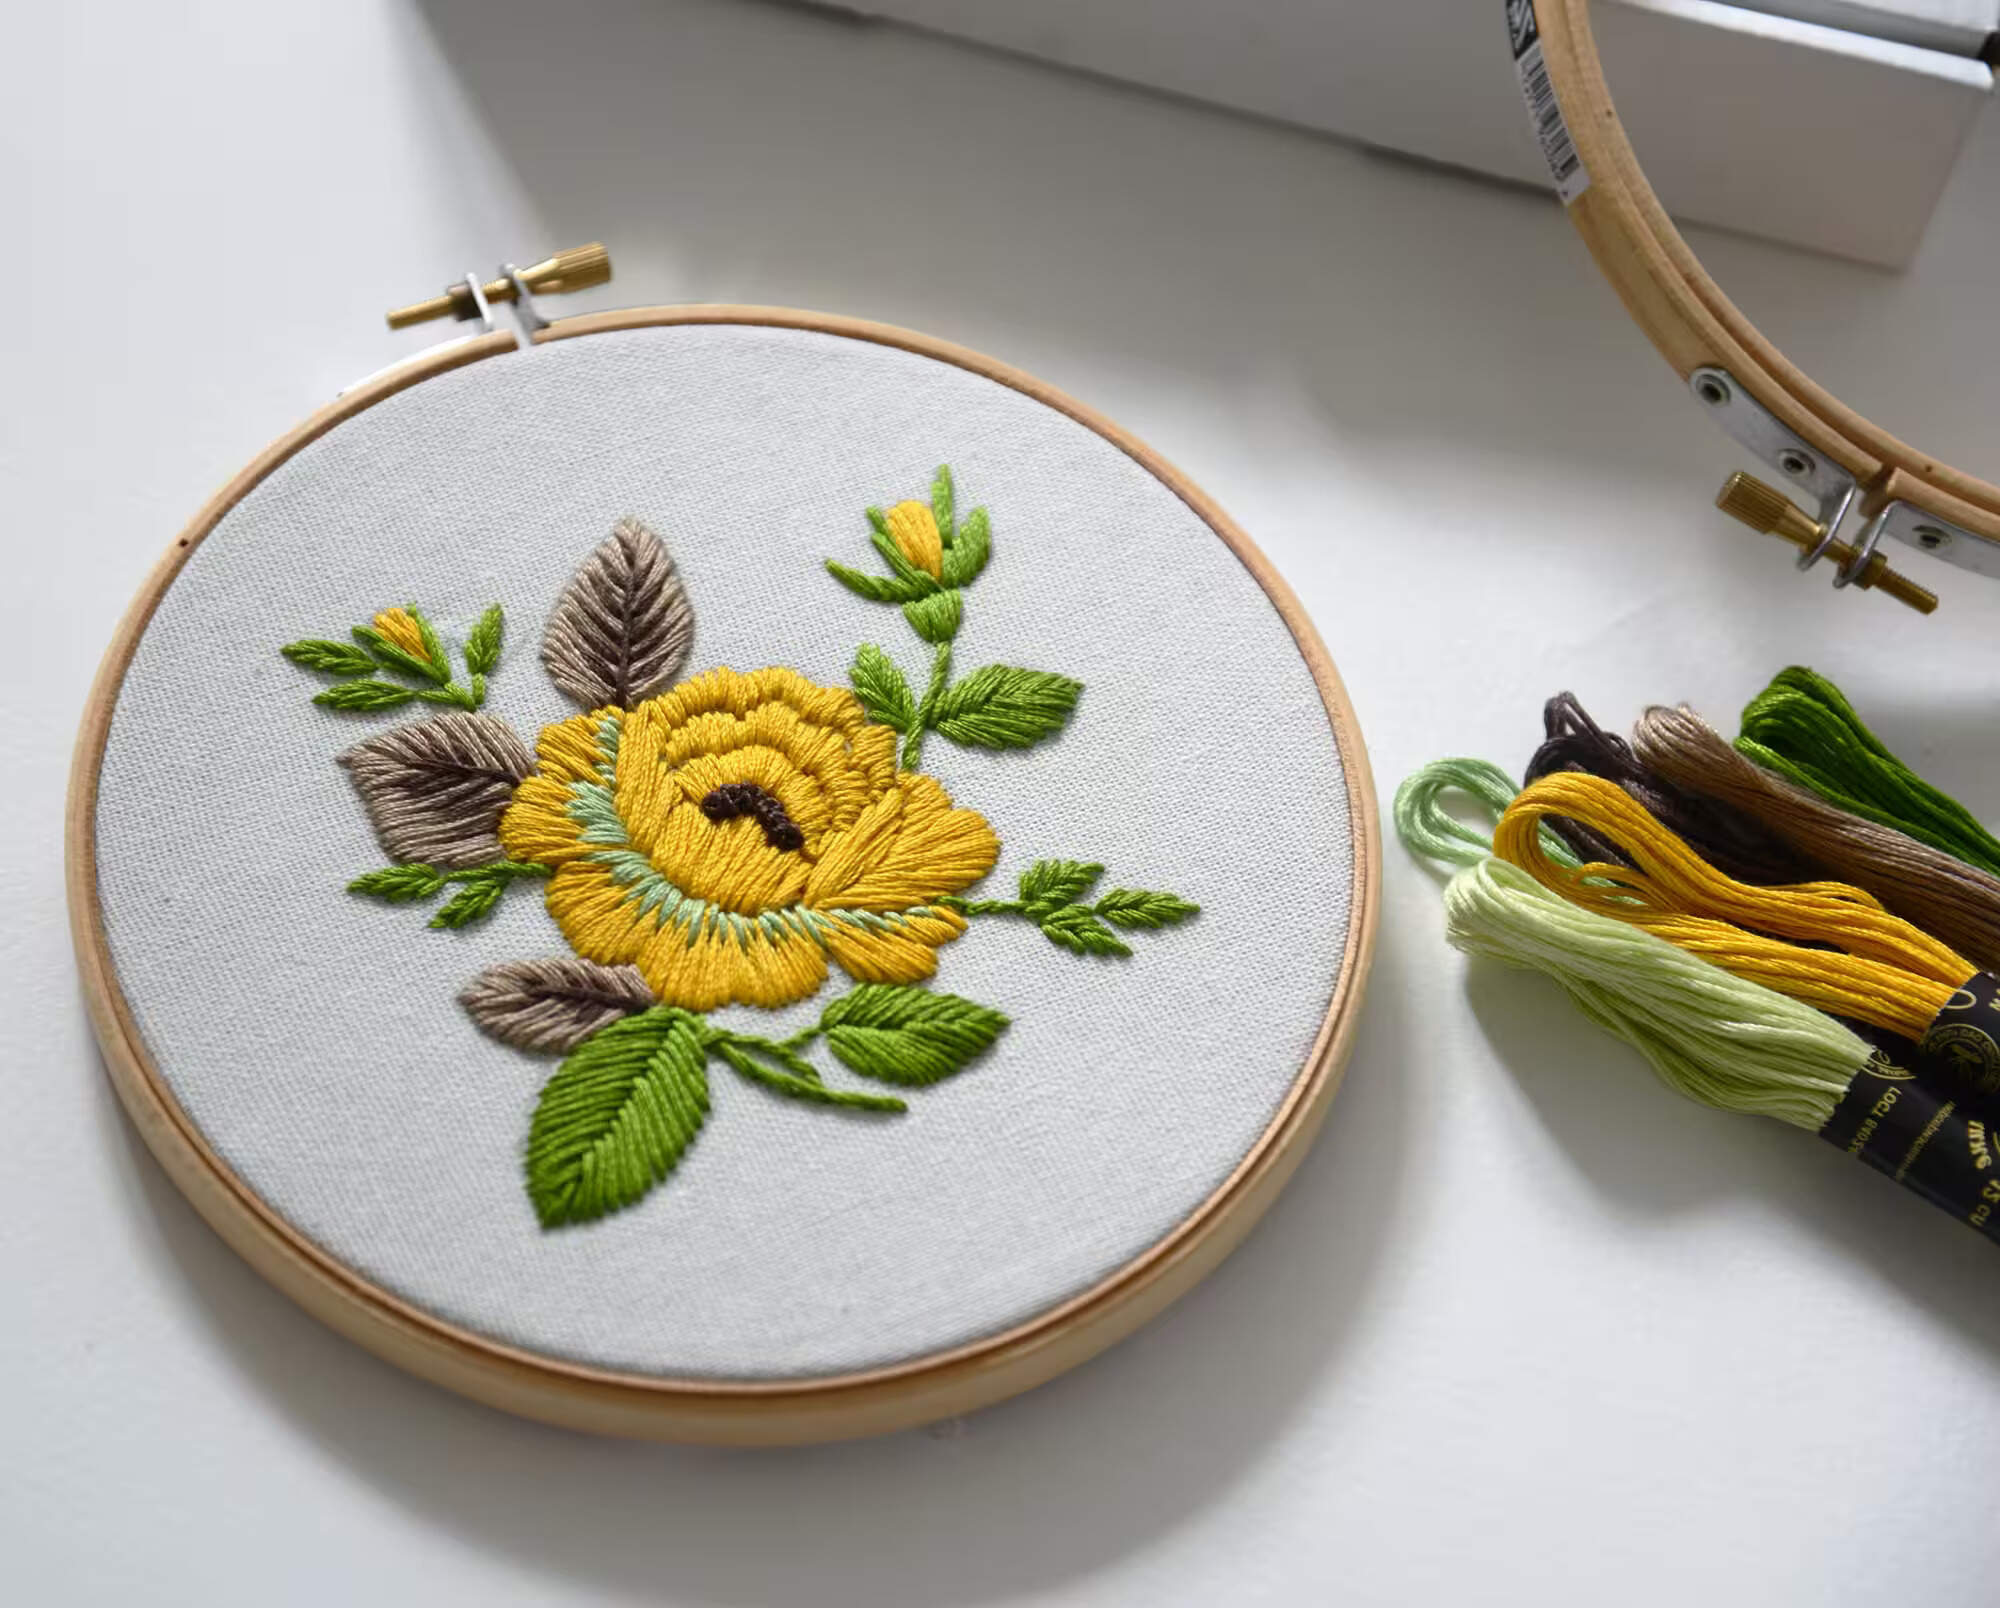 Embroidery Kit Review: Perfect for Her Creative Projects